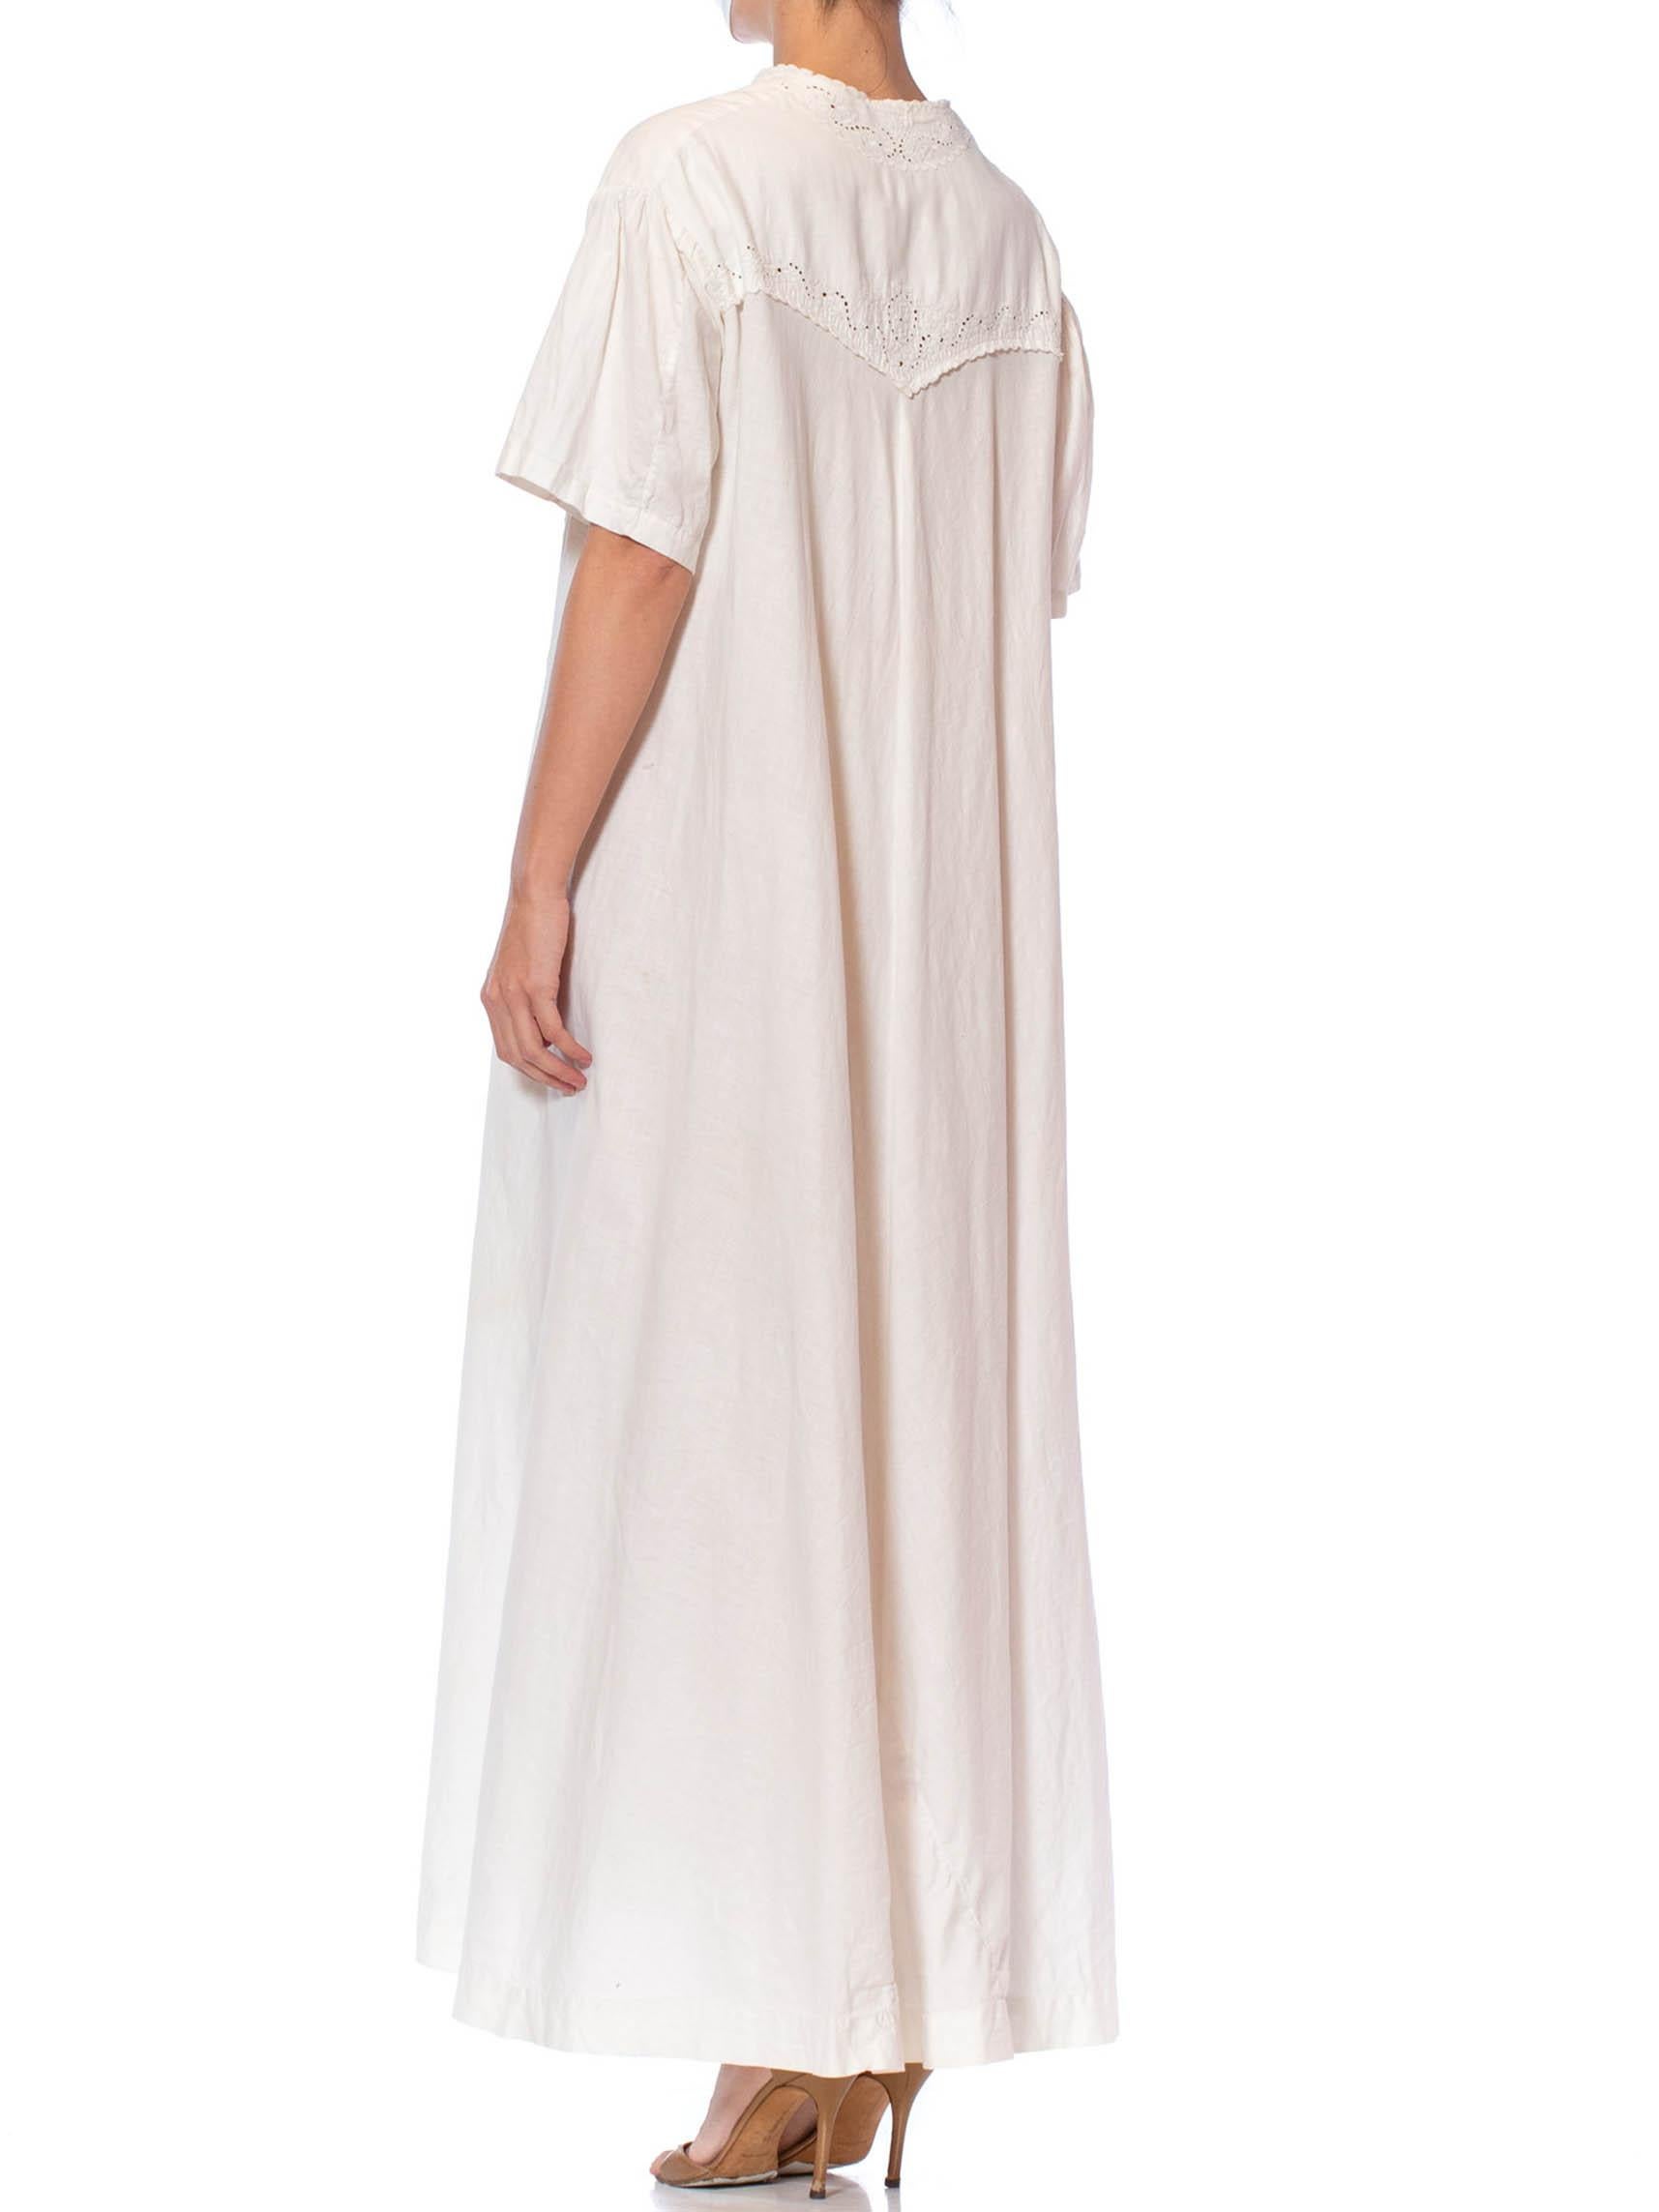 Women's Victorian Off White Hand Embroidered Organic Linen Short Sleeve Nightgown Duste For Sale